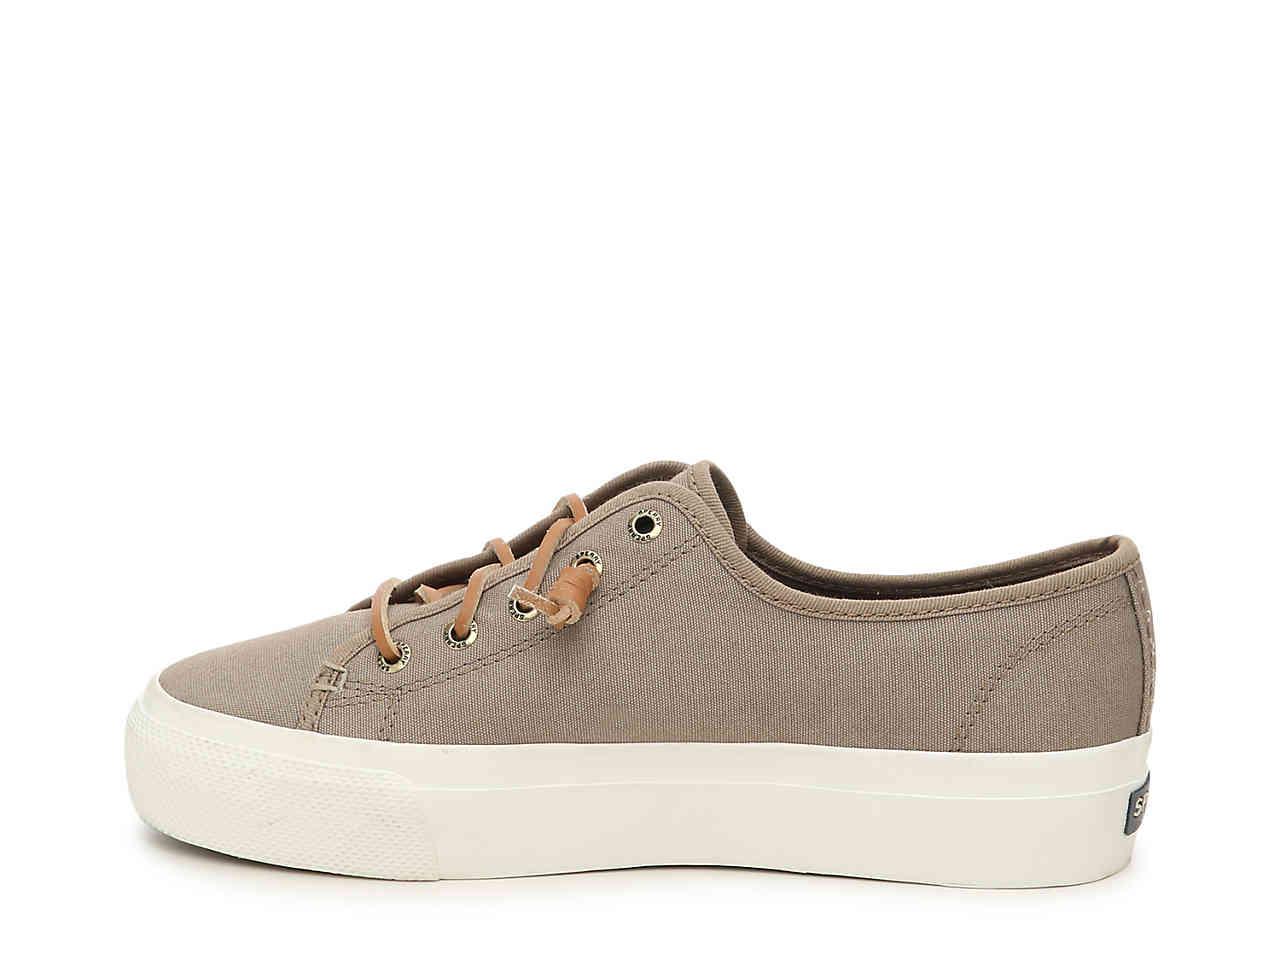 Sperry Top-Sider Leather Cliffside 